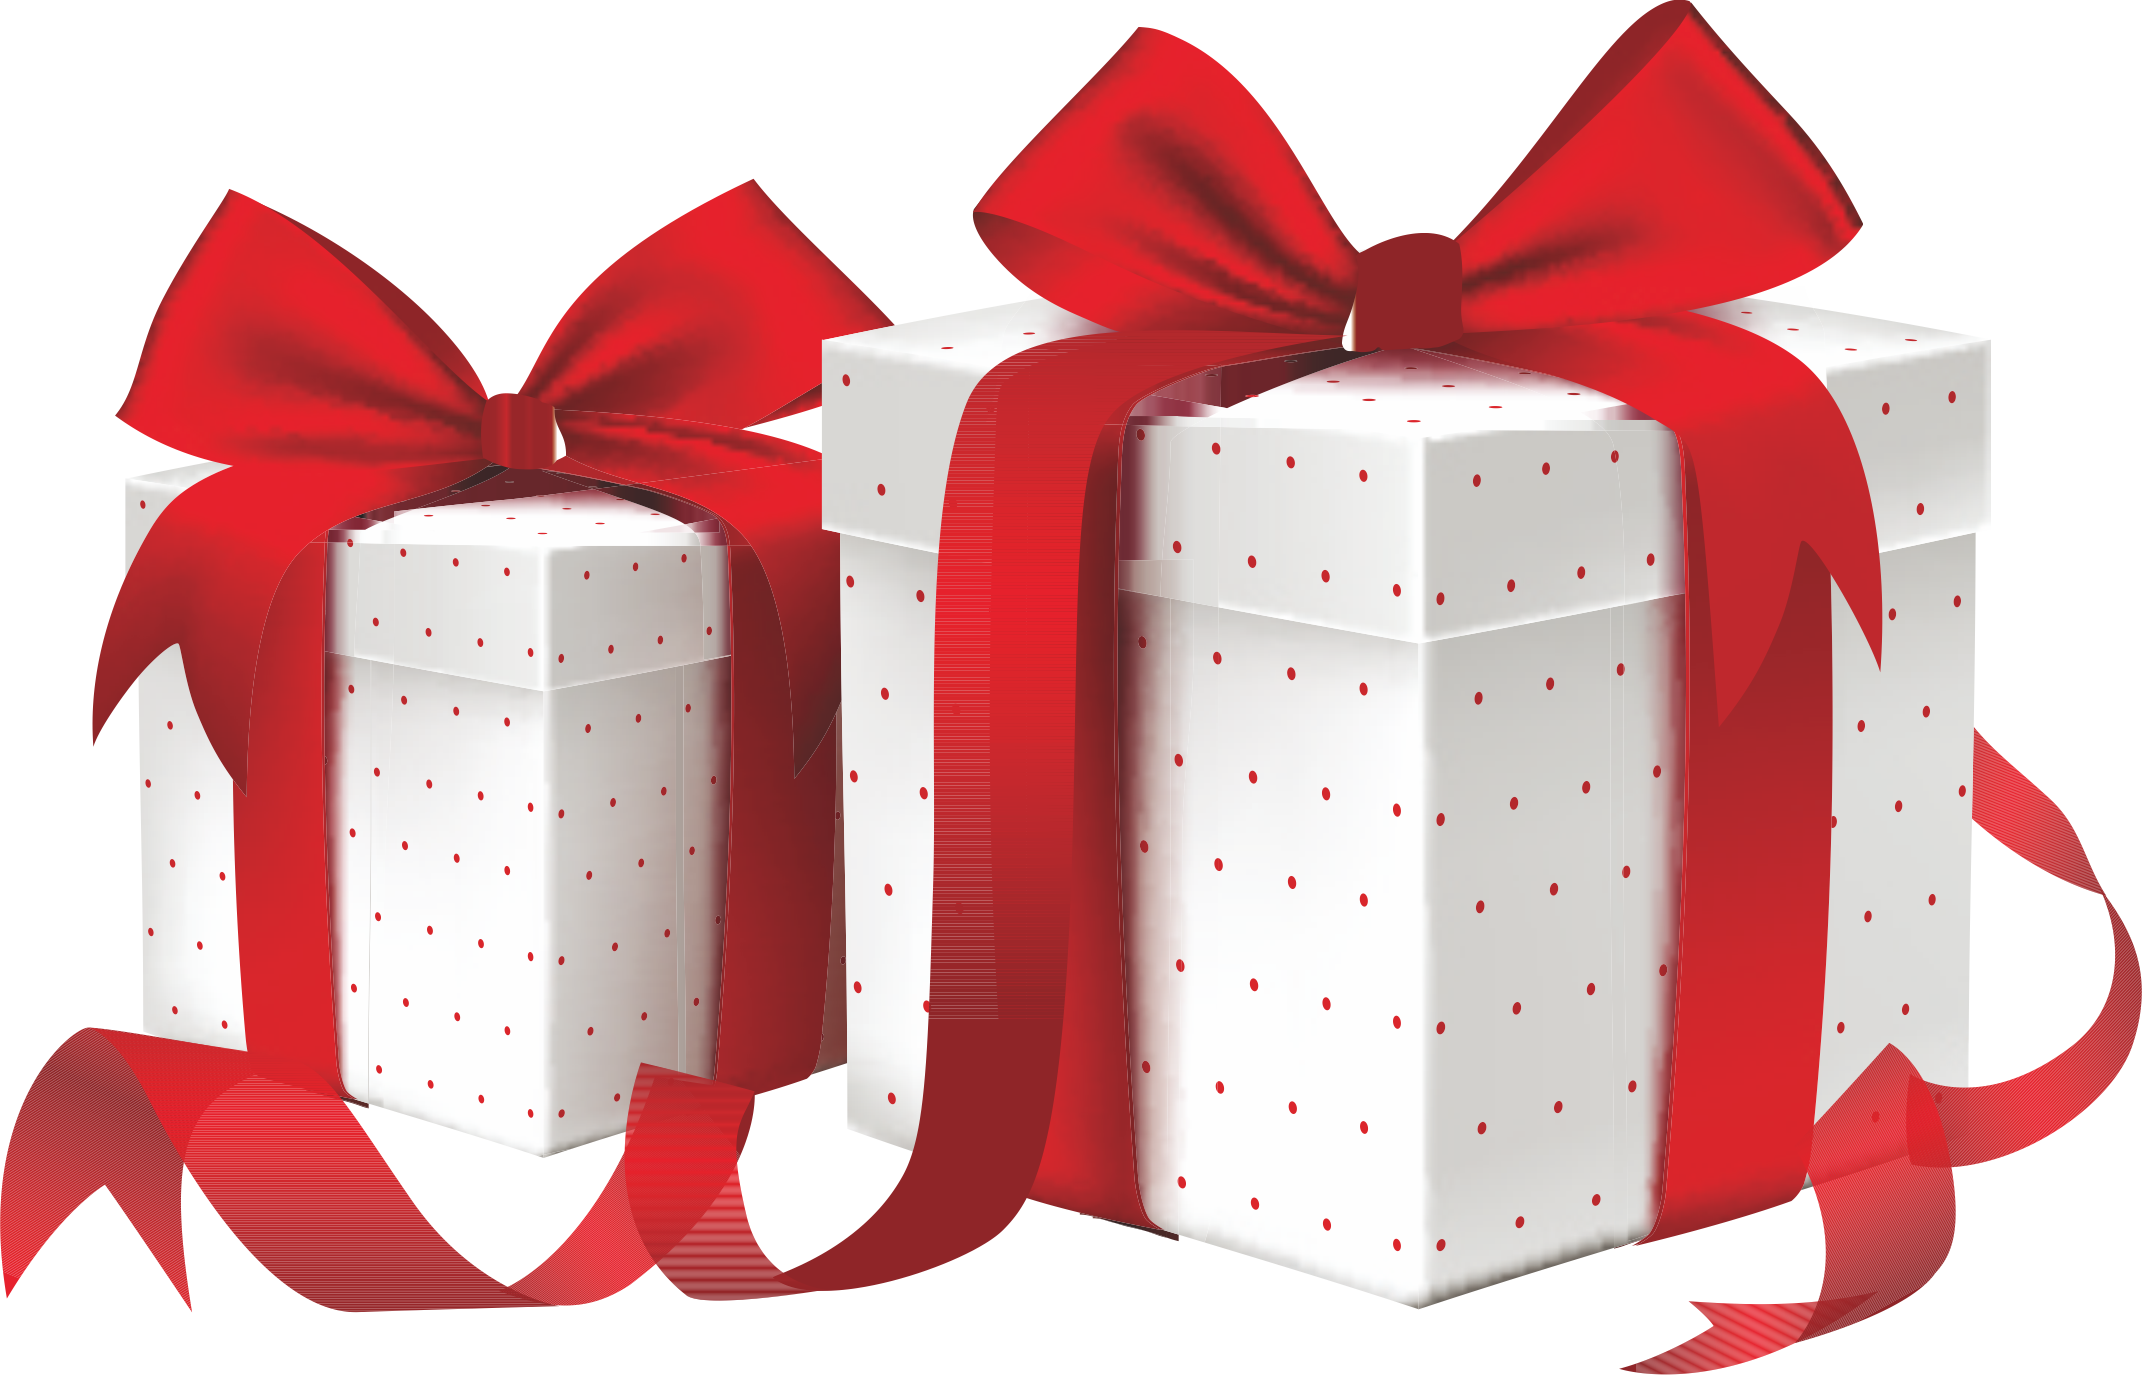 Free PNG Download: Gift Decorative Box with Ribbon